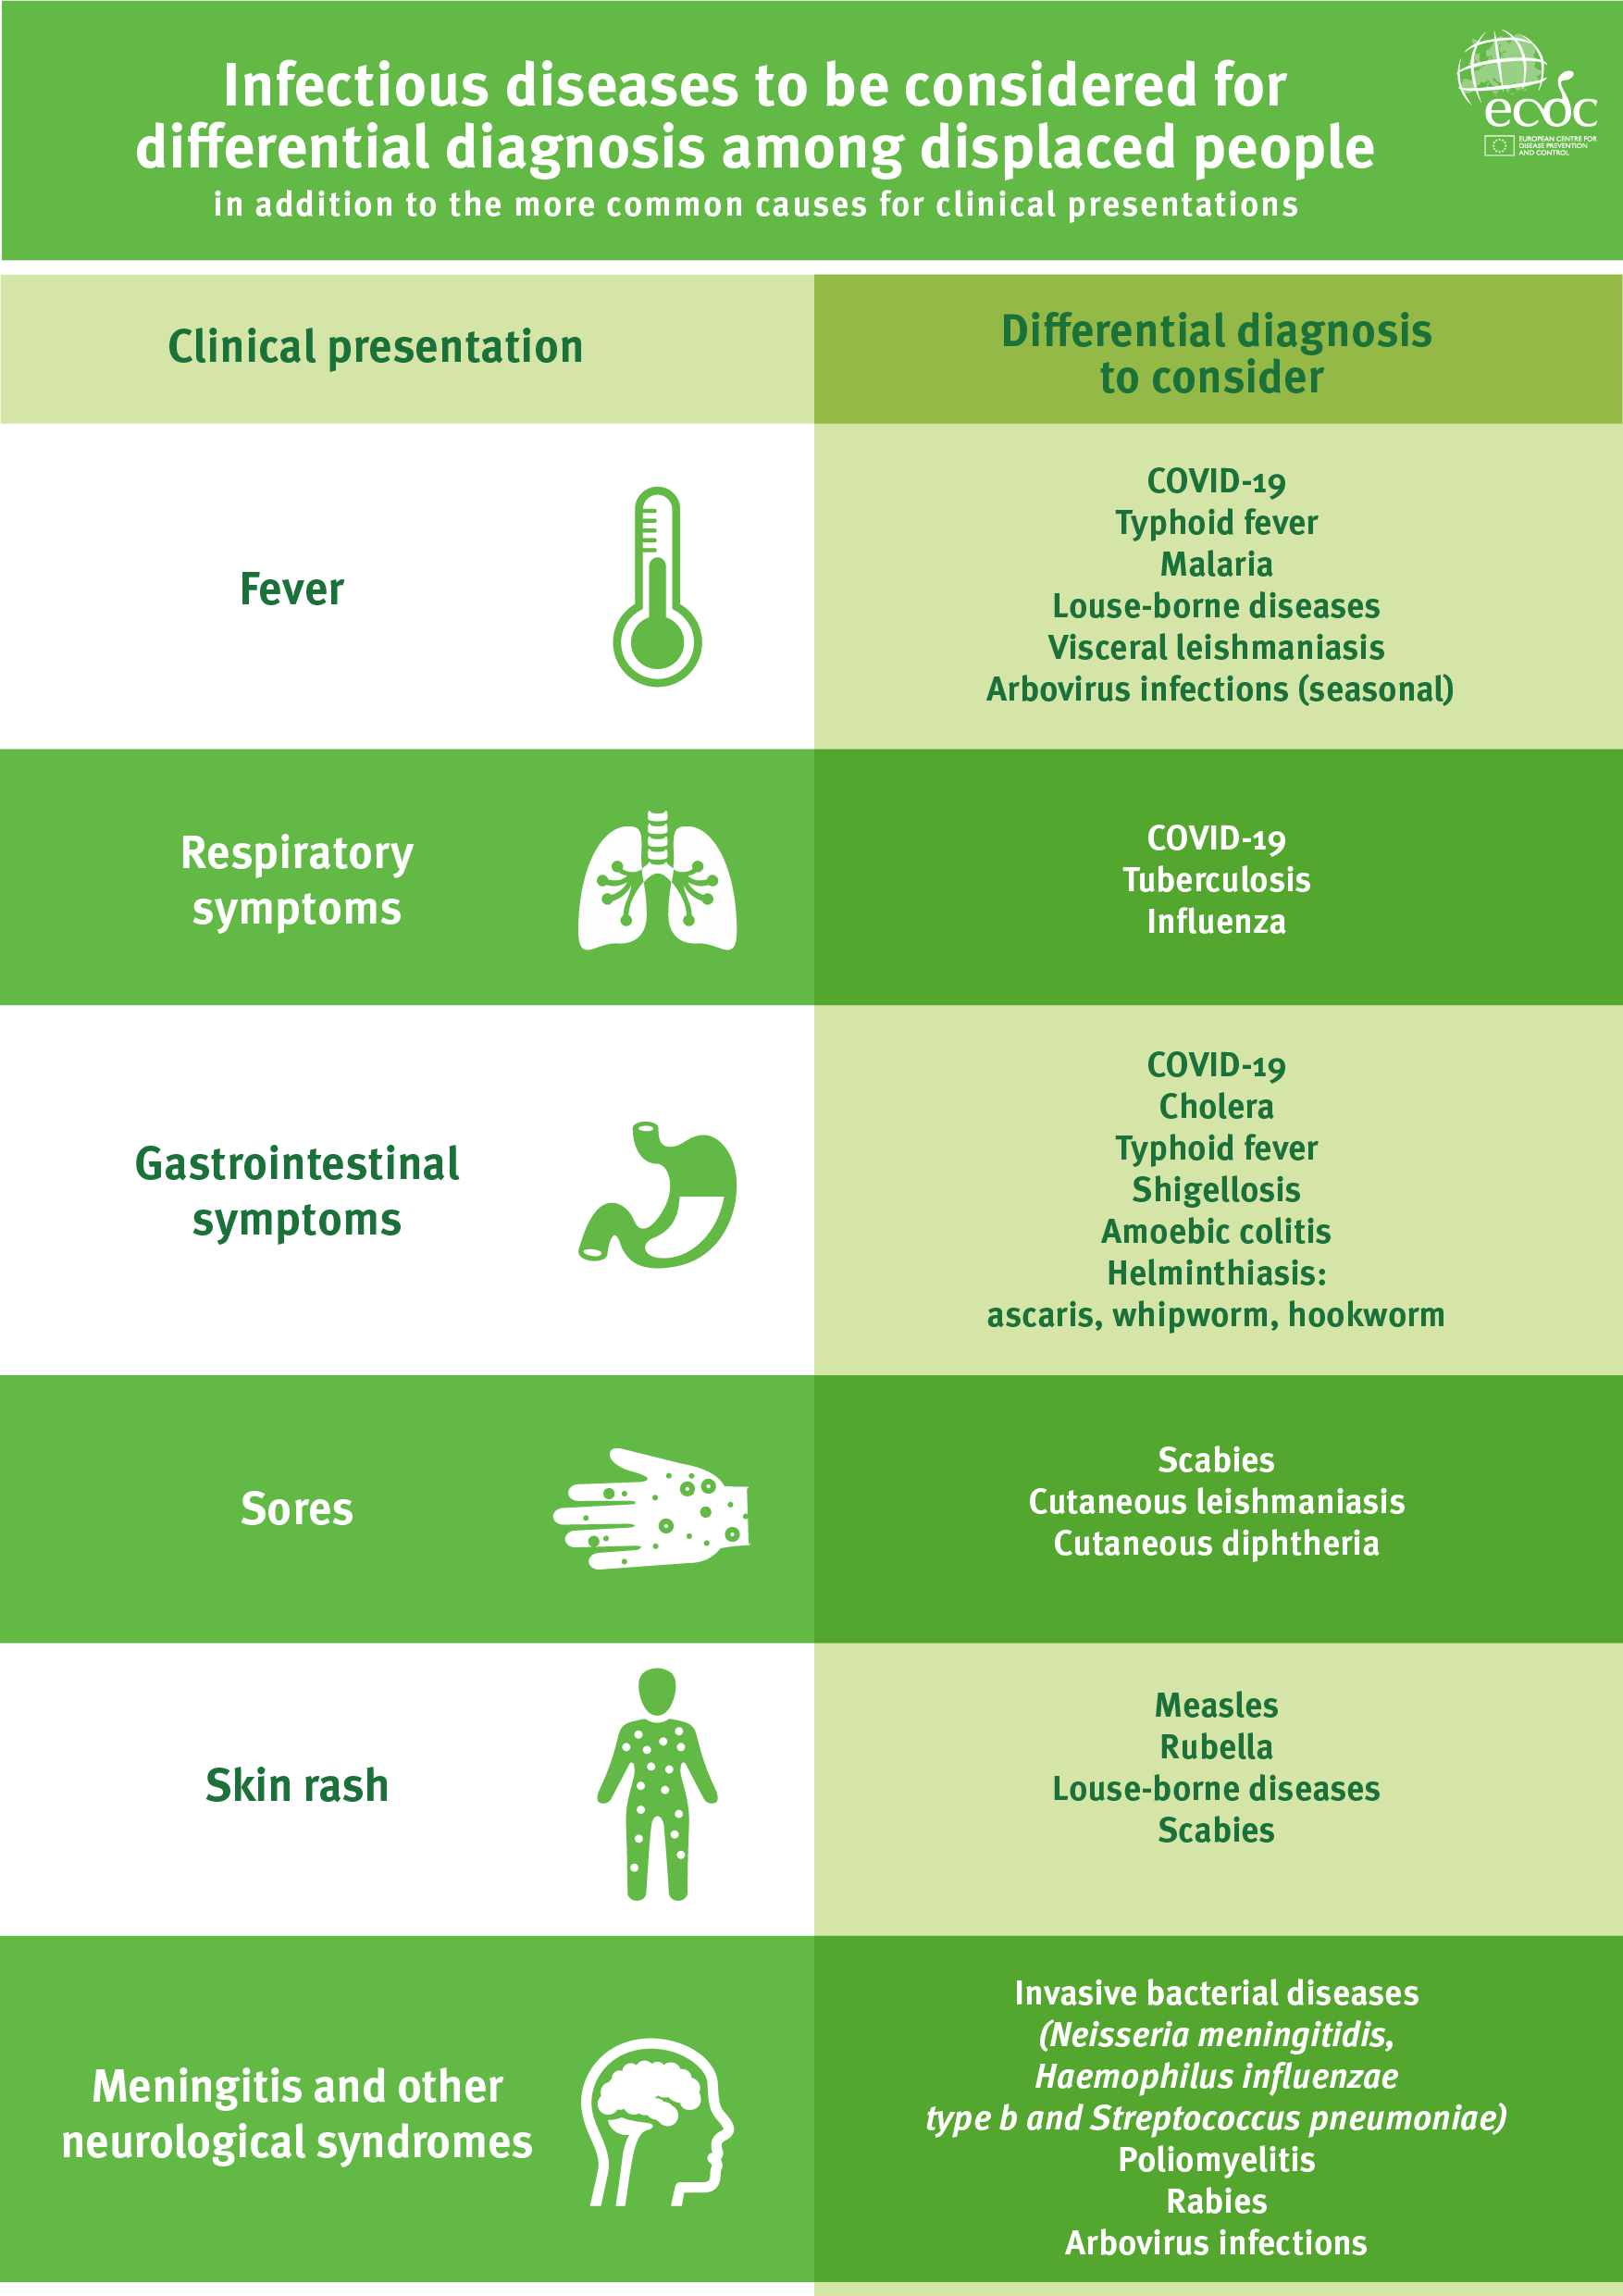 Infographic: Infectious diseases to be considered for differential  diagnosis among displaced people